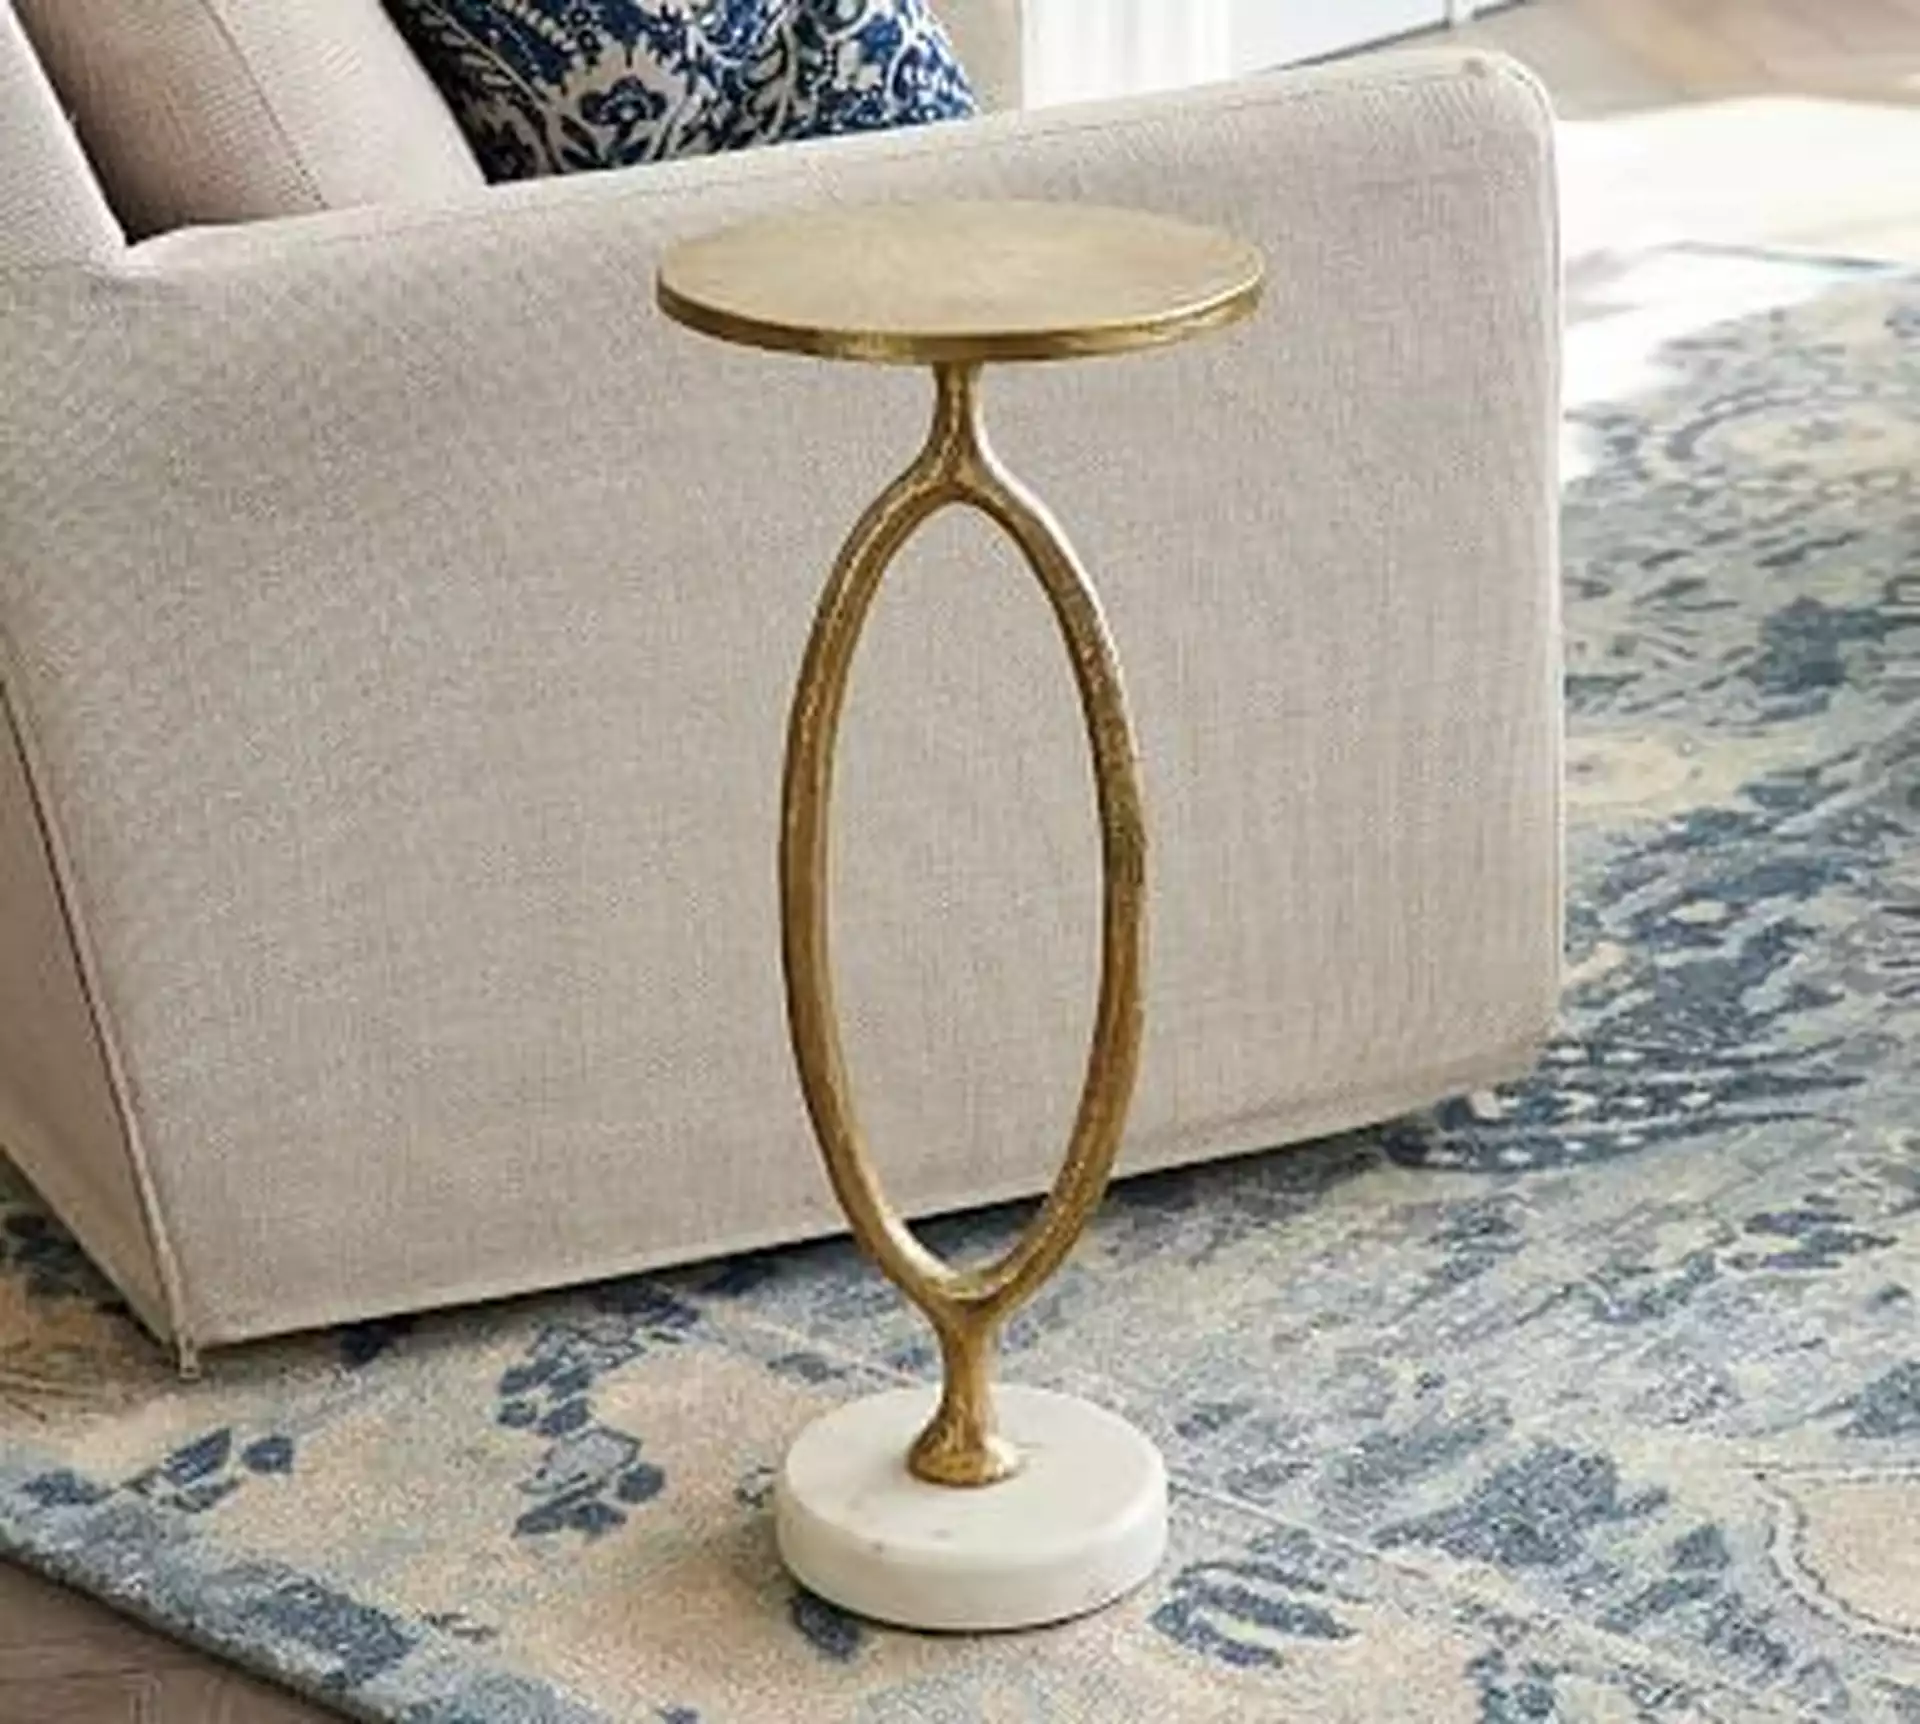 Bodhi 10" Round Metal Accent Table, Bronze